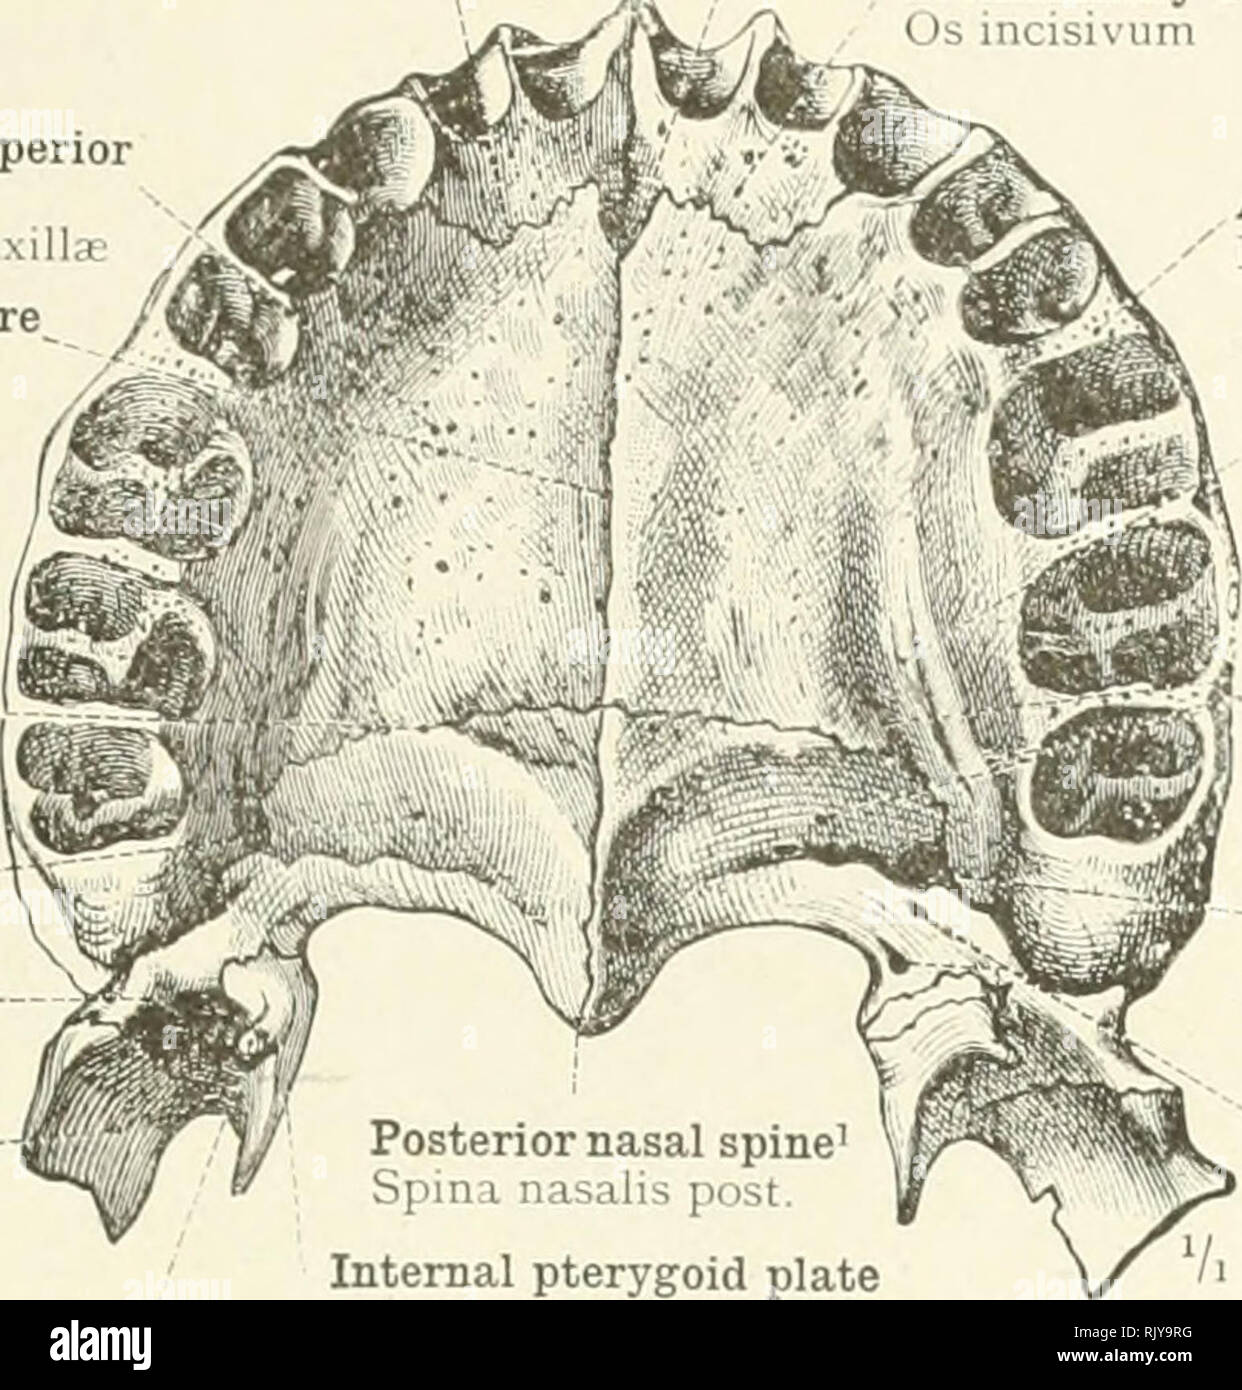 . An atlas of human anatomy for students and physicians. Anatomy. THE SKULL AND THE BONES OF THE SKULL m Anterior palatine or premaxillary suture Sutura incisiva Palate process of the superior maxillary bone Processus palatinus maxi Middle or median palatine suture Sutura palatina mediana Posterior or transverse palatine suture- Sutura palatina transversa Horizontal or palate plate of the palate bone Pars horizontalis ossis palatini Pyramidal process, or tuberosity,. of the palate bone Processus psramidalis External pterygoid plate Lamina lateralis proces- sus pterygoidei Anterior palatine fos Stock Photo